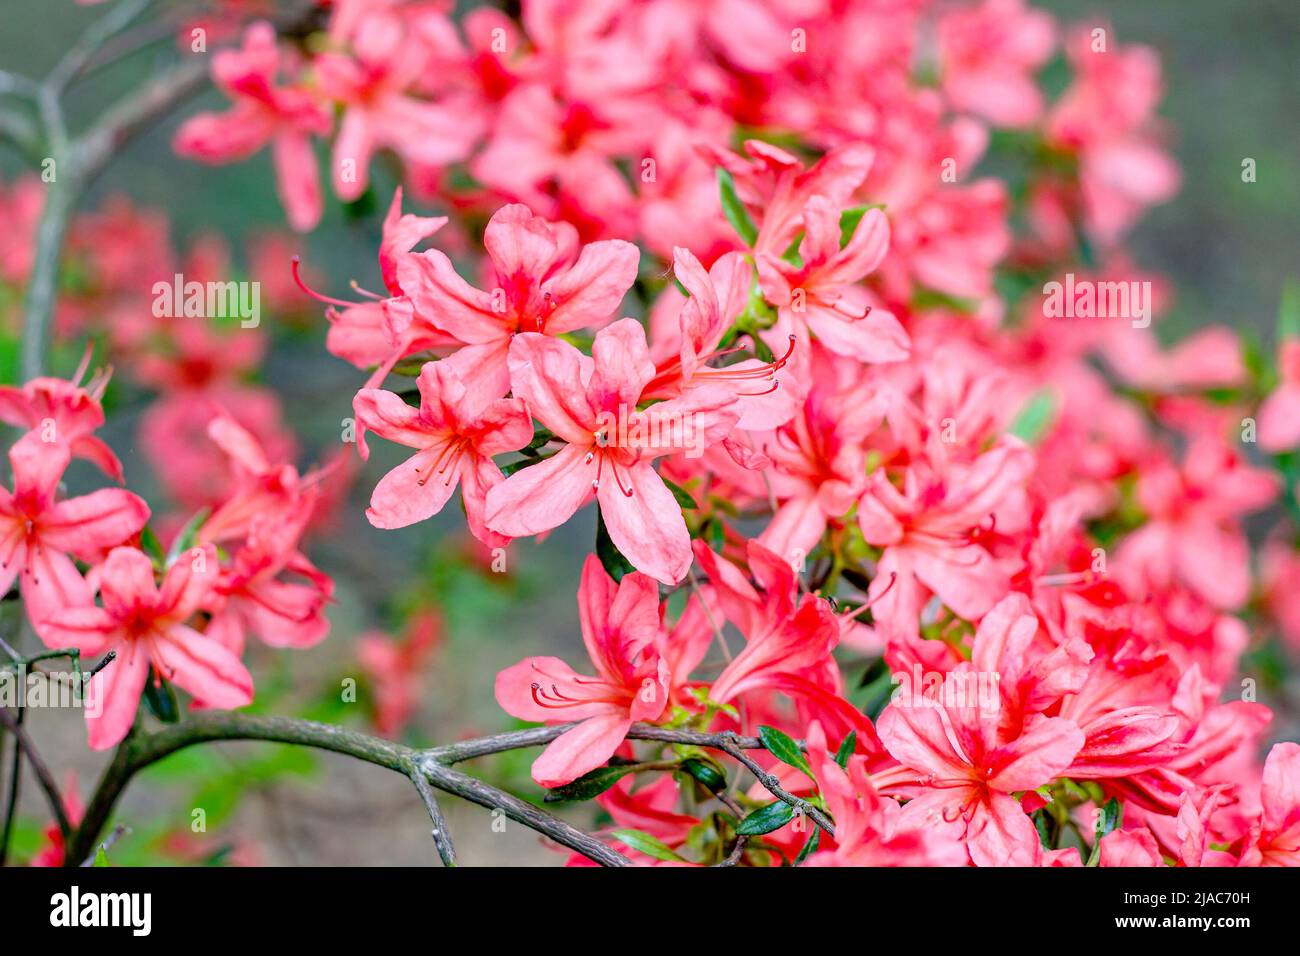 Bright pink and red Rhododendron kaempferi Planch blossoming flowers with green leaves in the garden in spring. Stock Photo